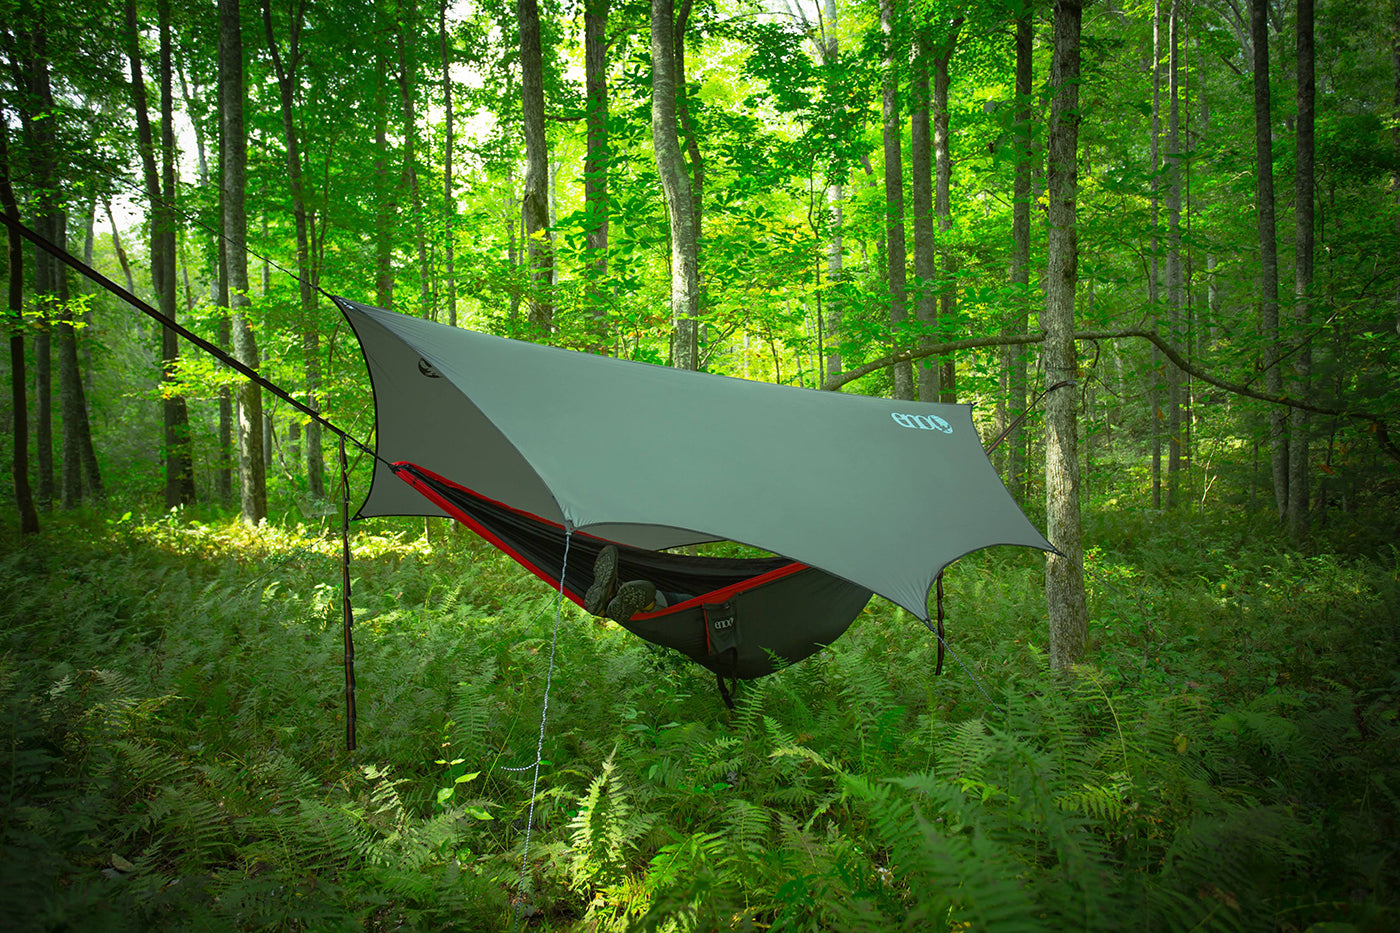 Hammock hanging in the forest under an ENO tarp